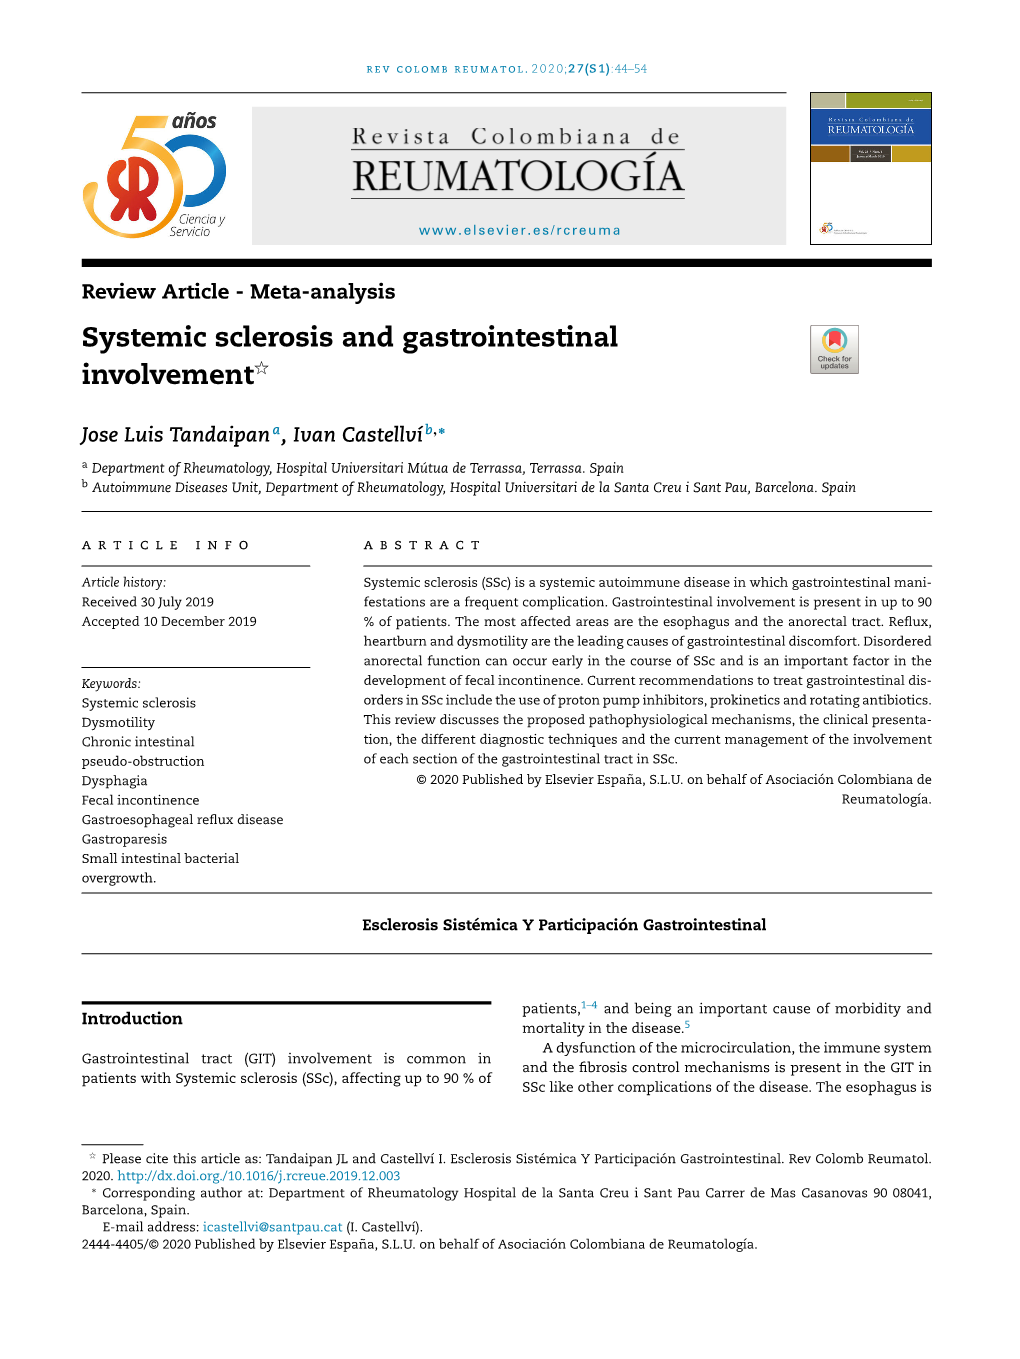 Systemic Sclerosis and Gastrointestinal Involvementଝ